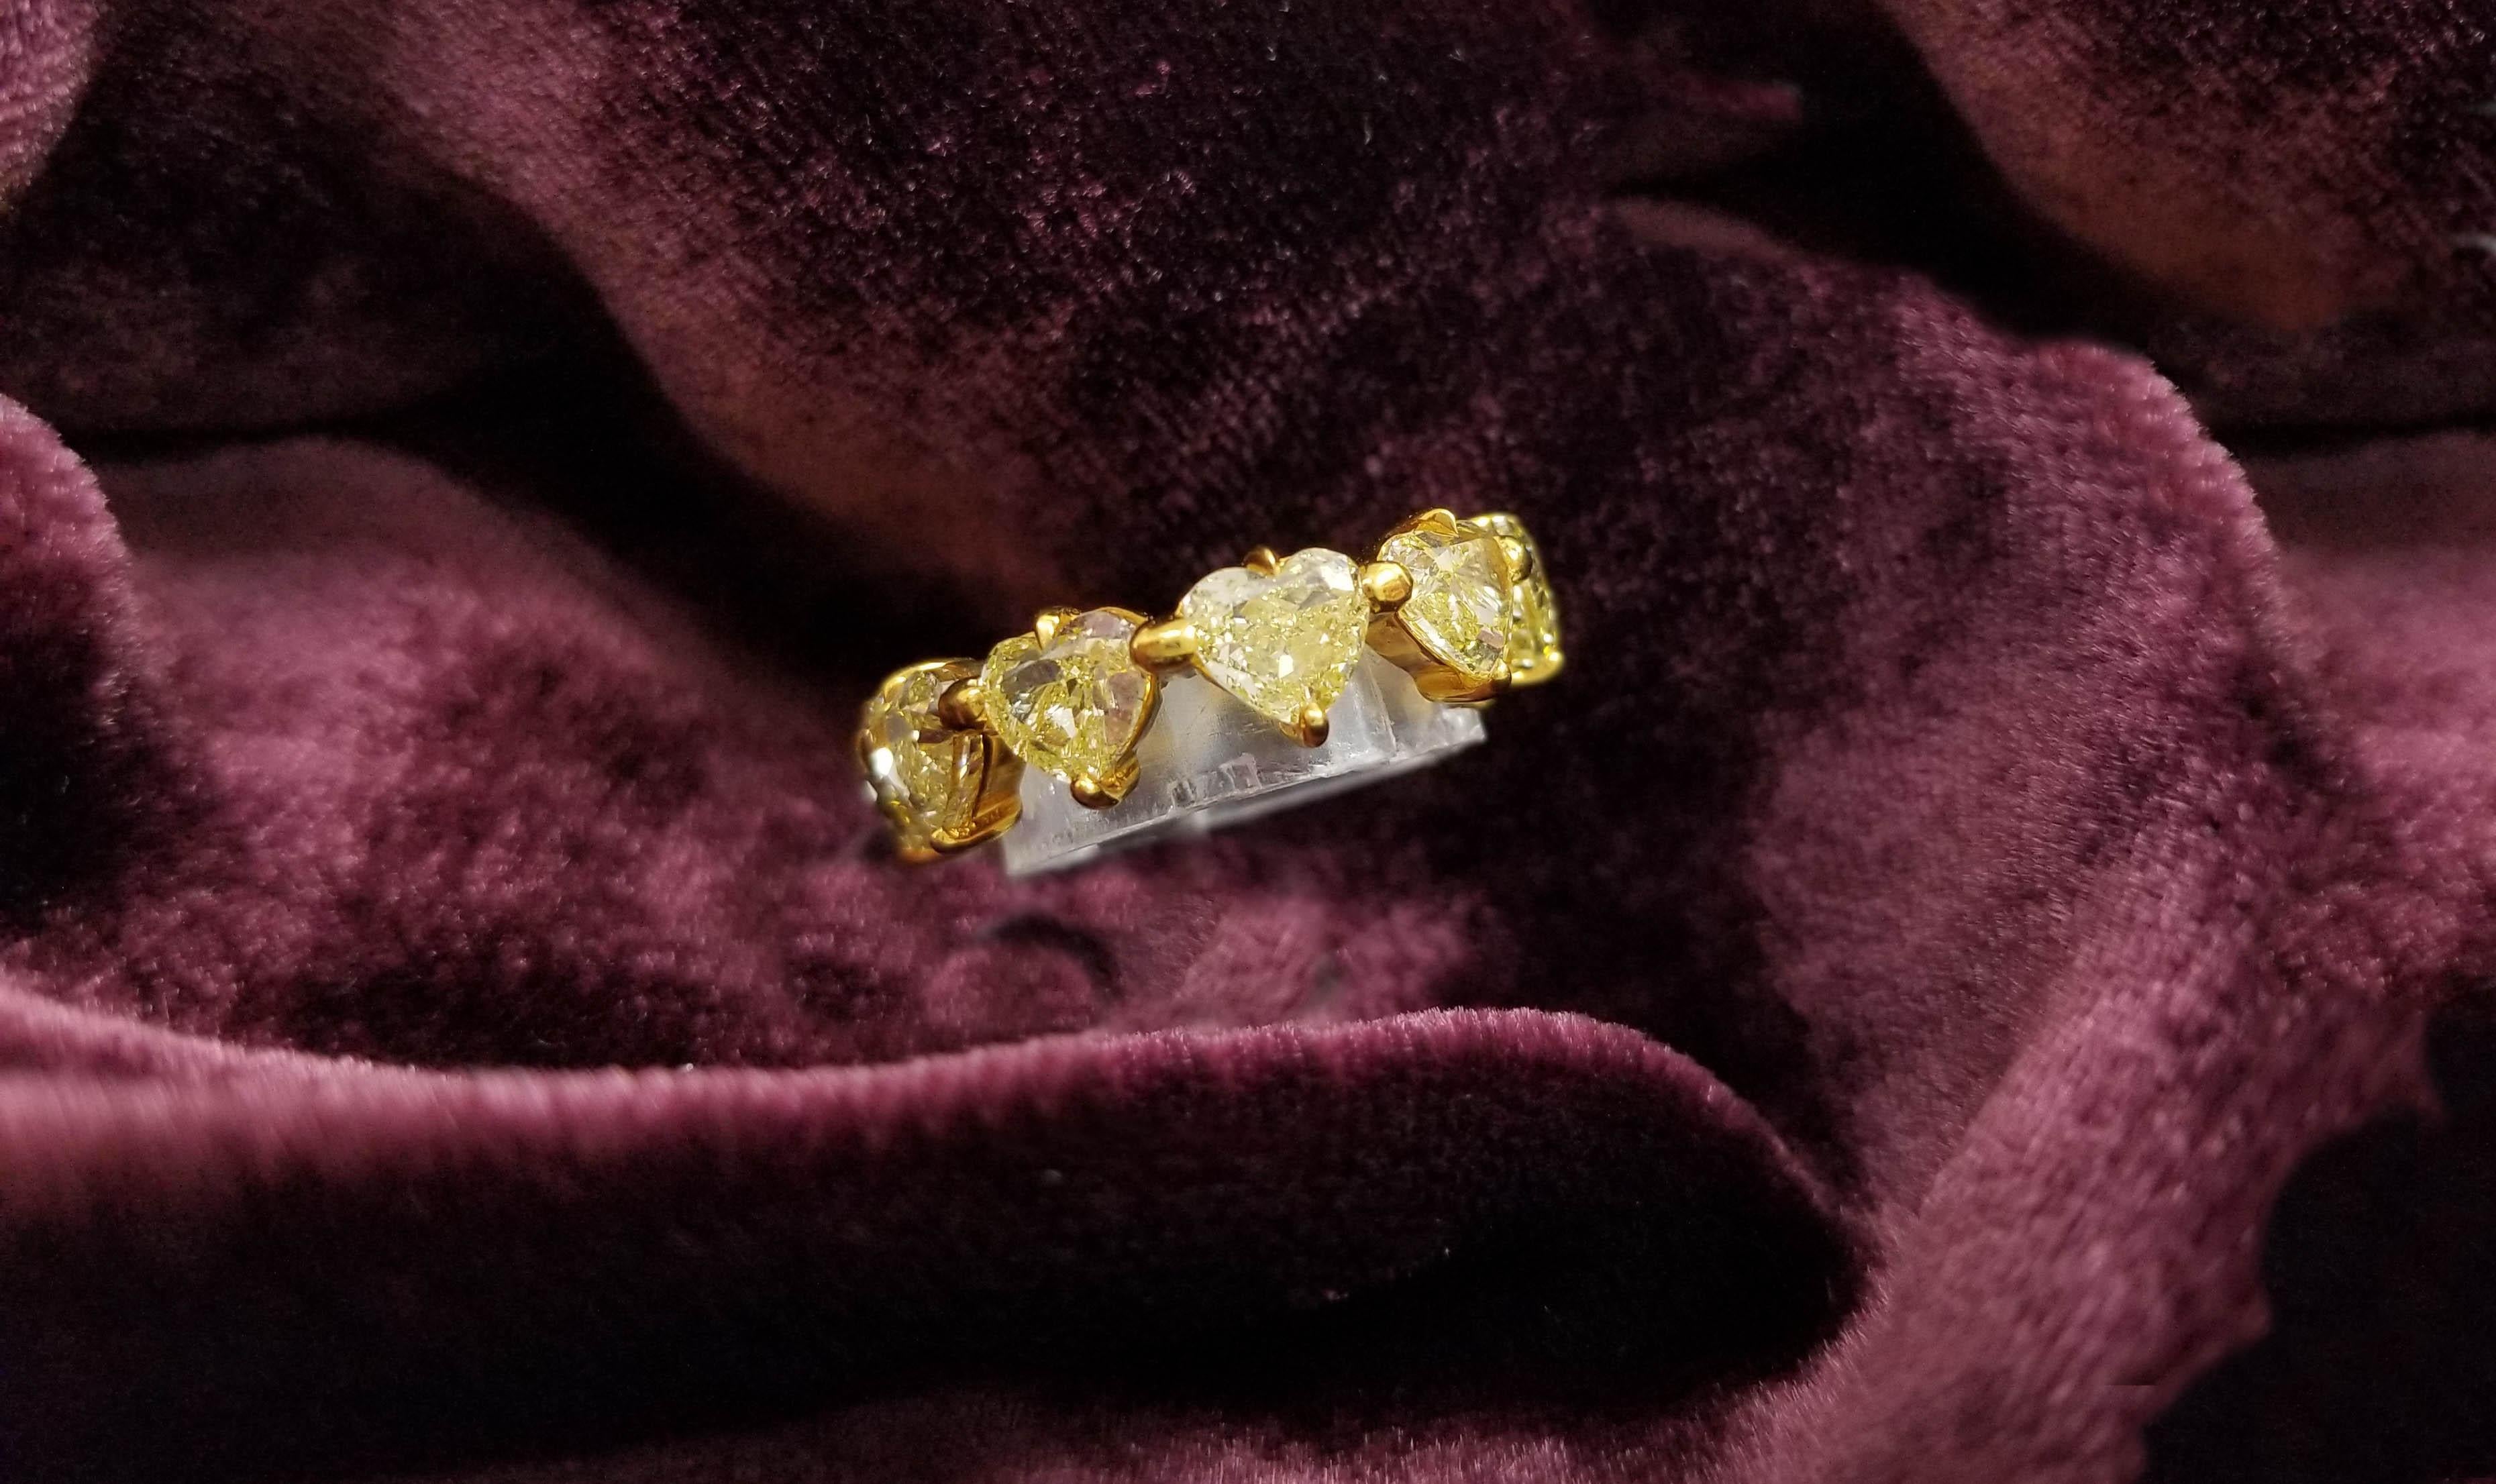 Scarselli Heart Band Ring in 18 Karat Gold with Natural Yellow Diamonds 1